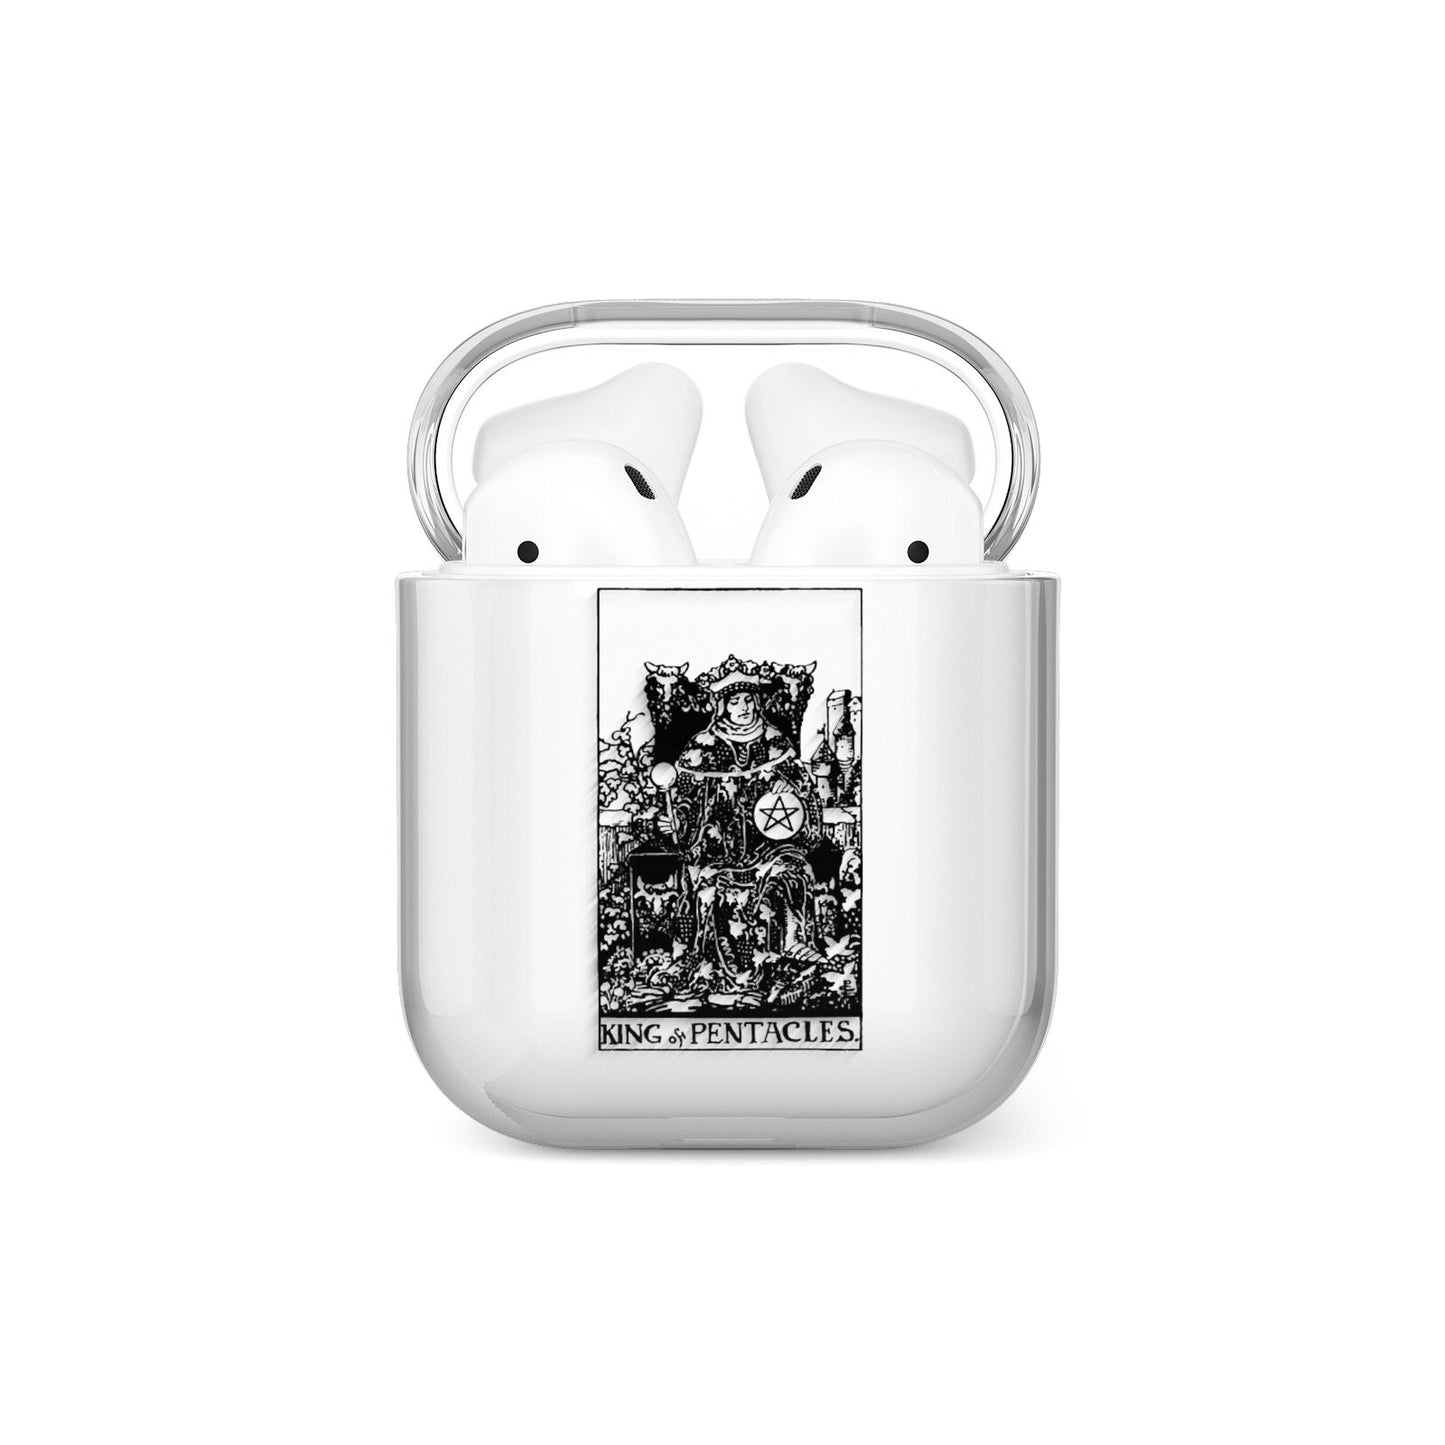 King of Pentacles Monochrome AirPods Case